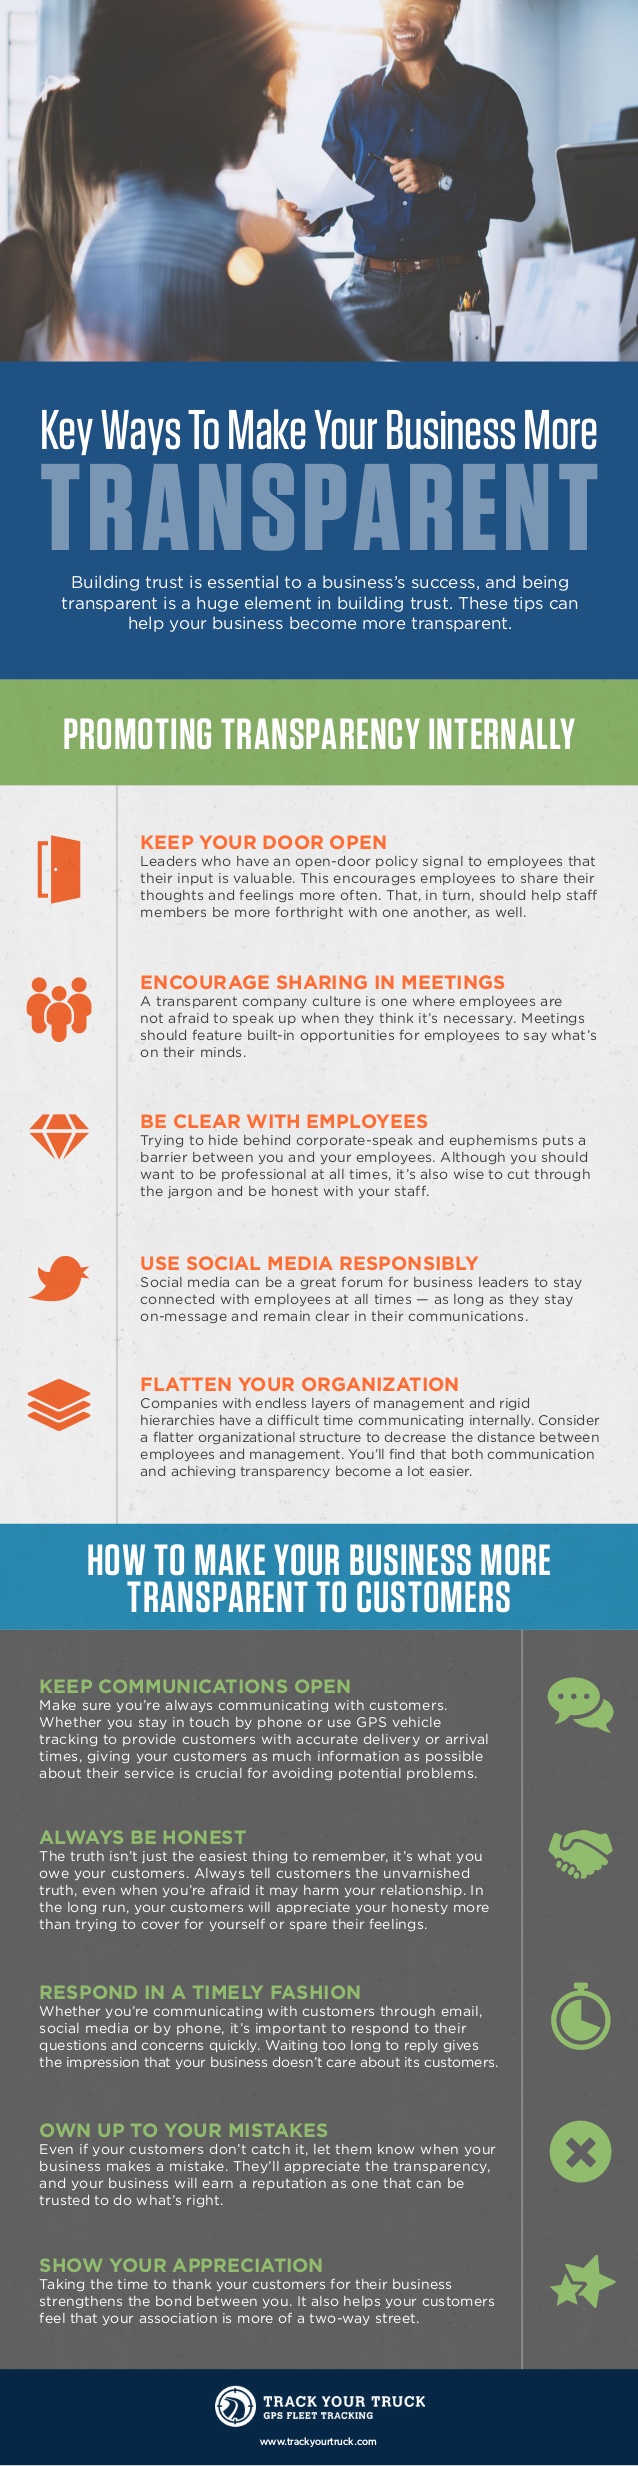 This infographic provides practical advice on how to make your business more transparent internally and externally